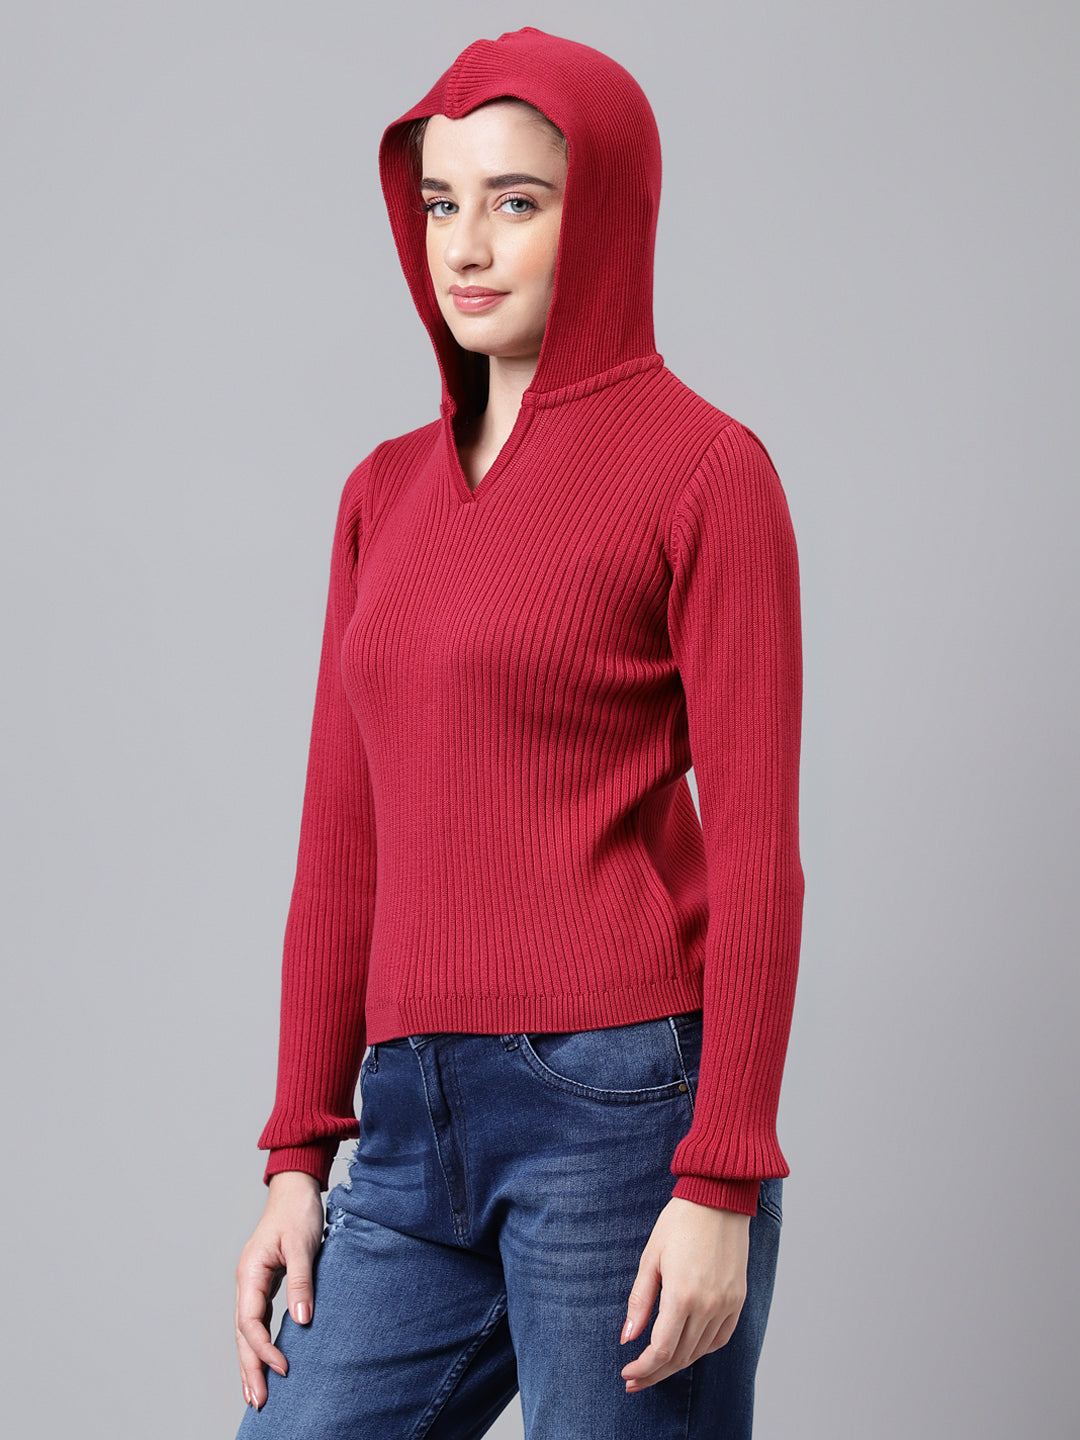 Rose Full Sleeve Solid Women Hoodie Sweater Top for Casual